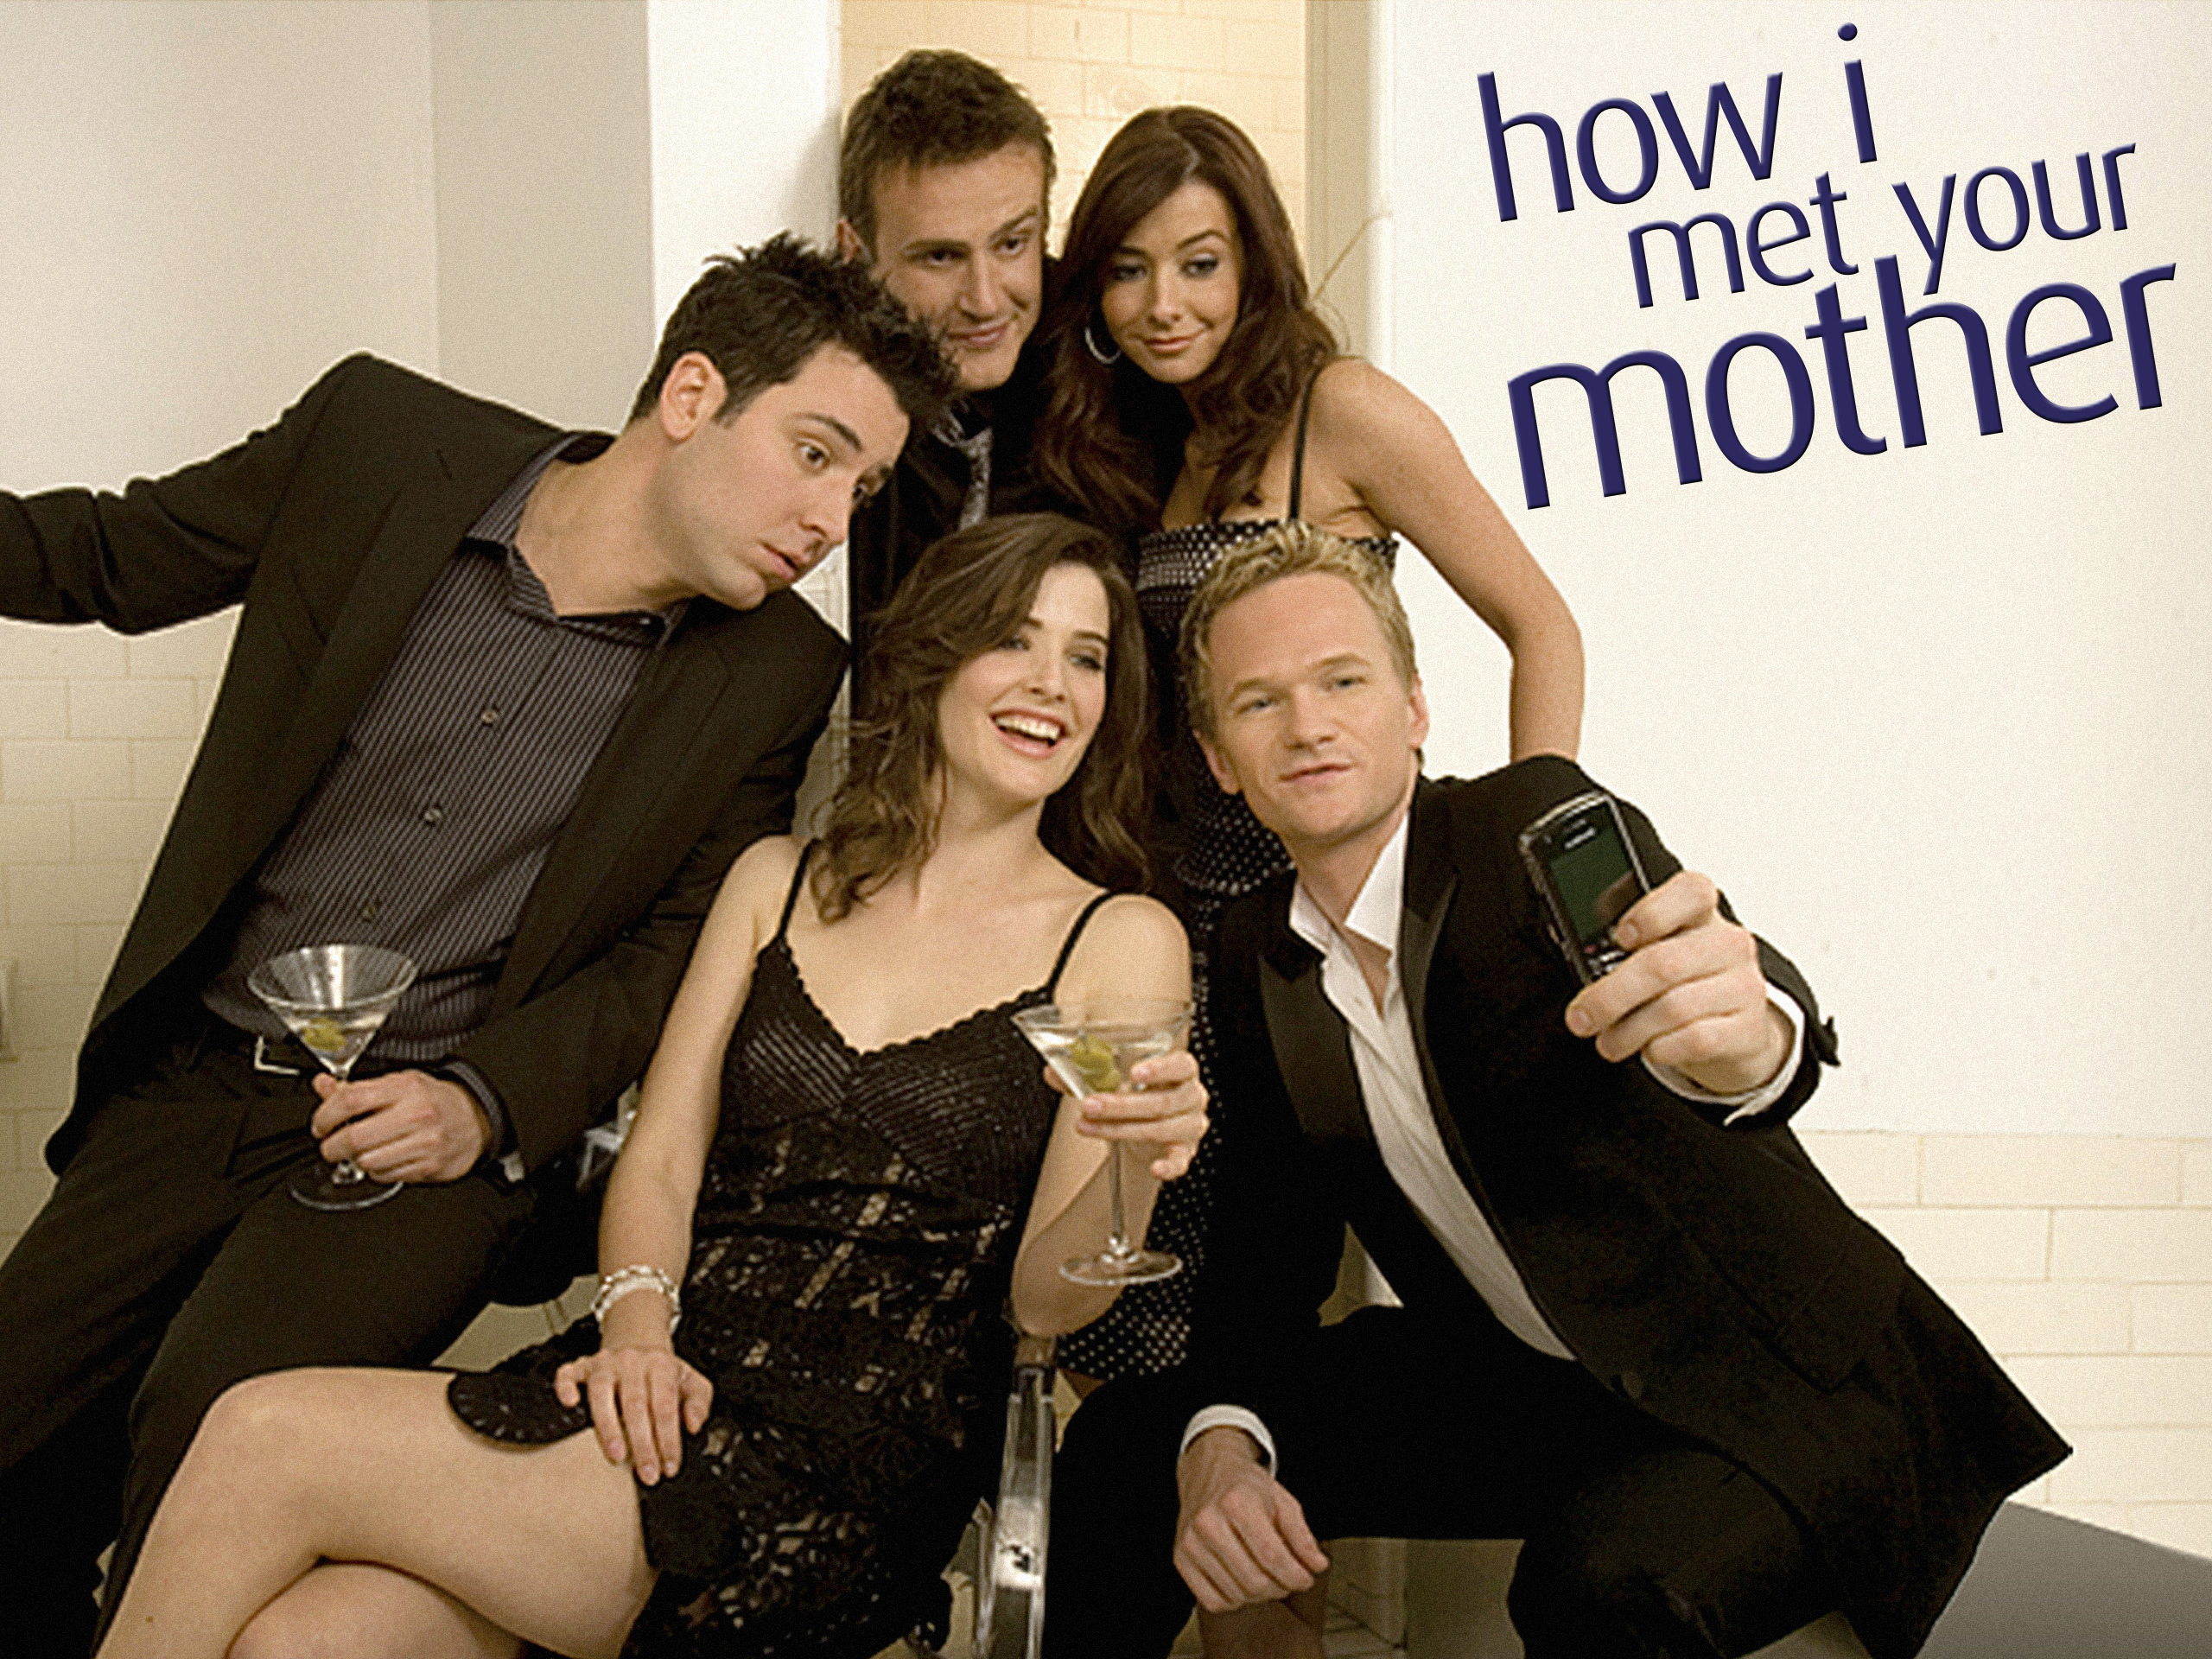 Where to find “watch how i met your mother online free” and how to - Britney How I Met Your Mother